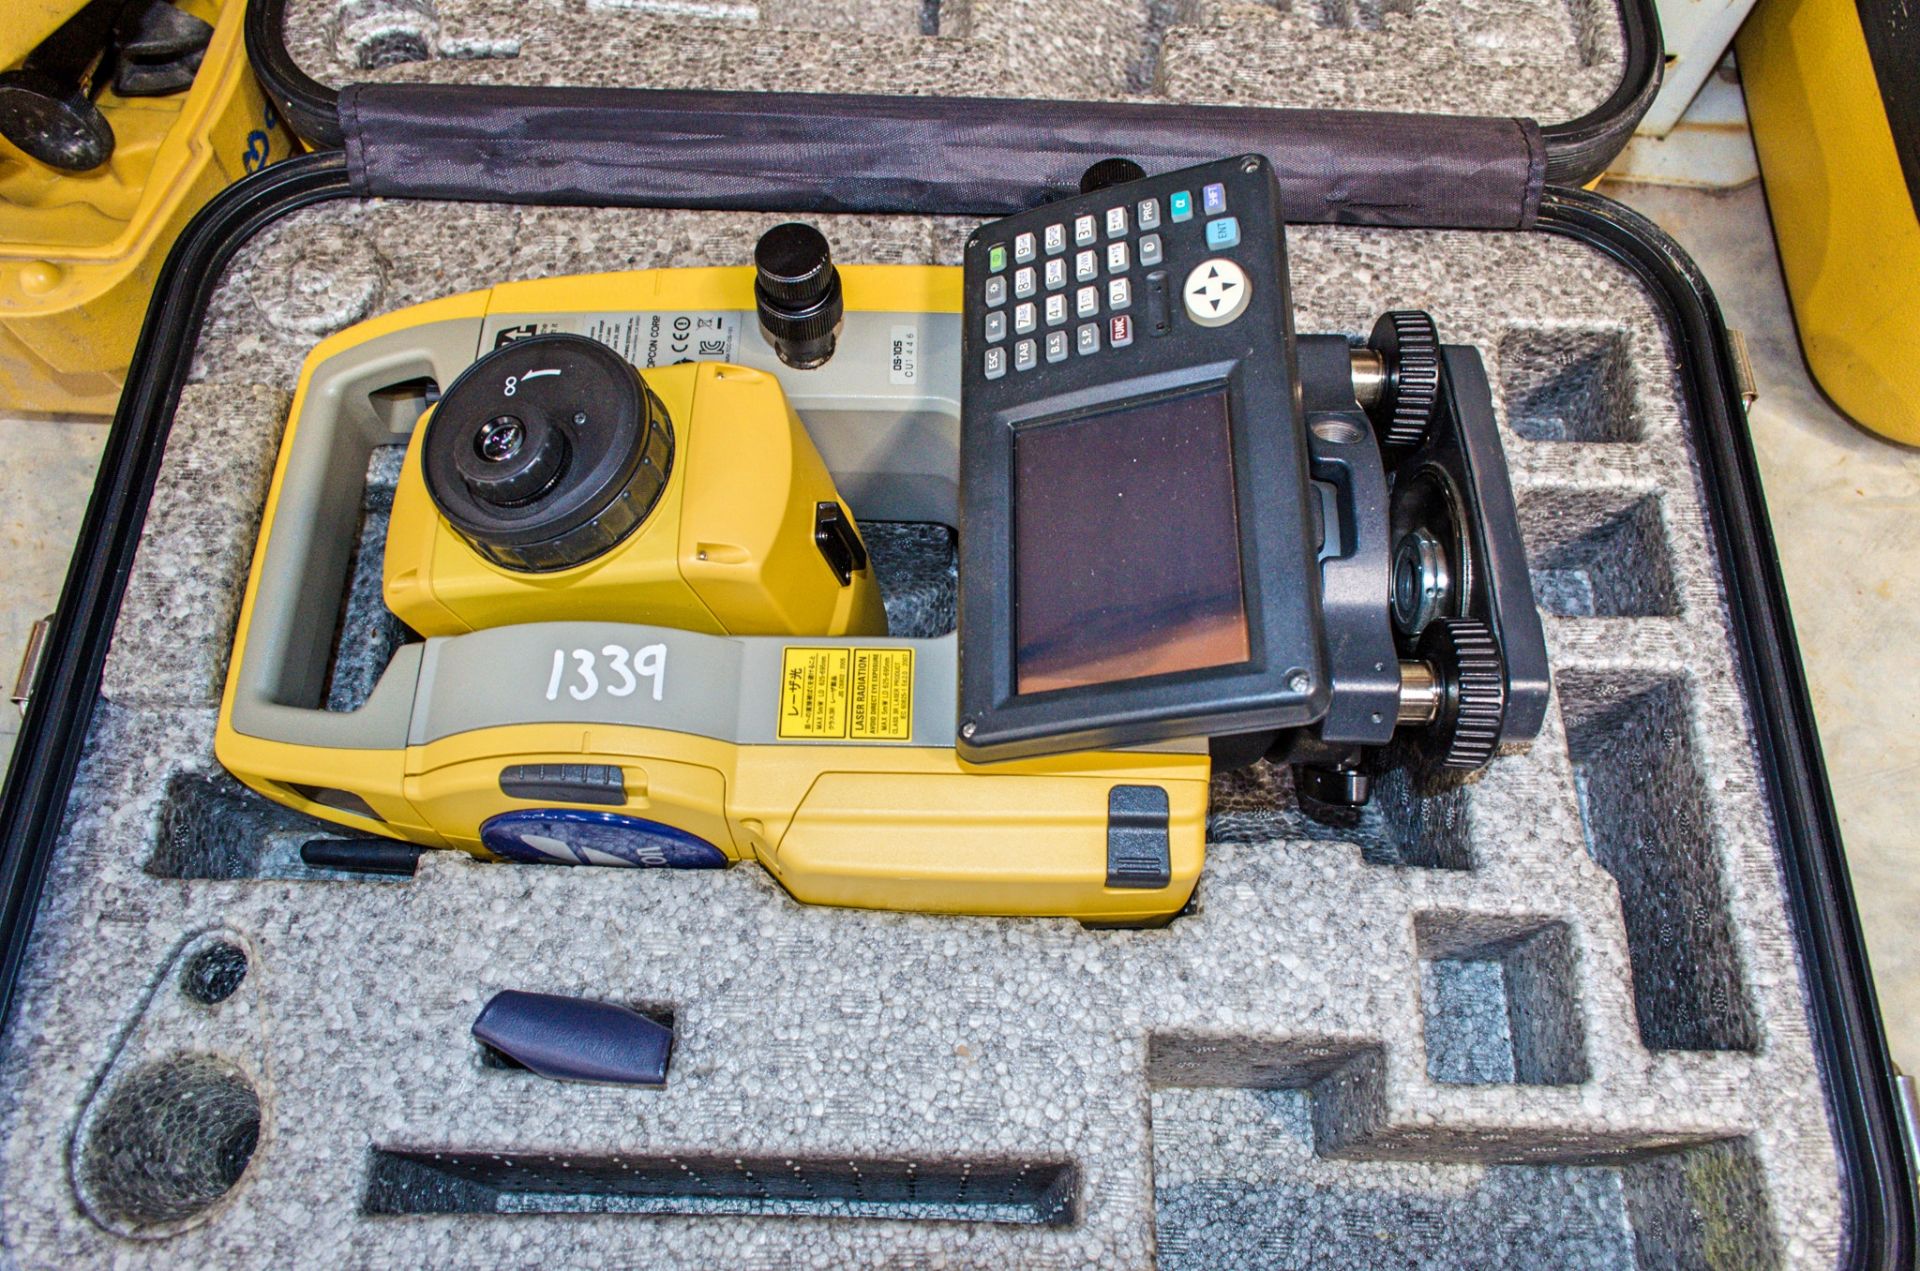 Topcon OS-105 total station c/w carry case